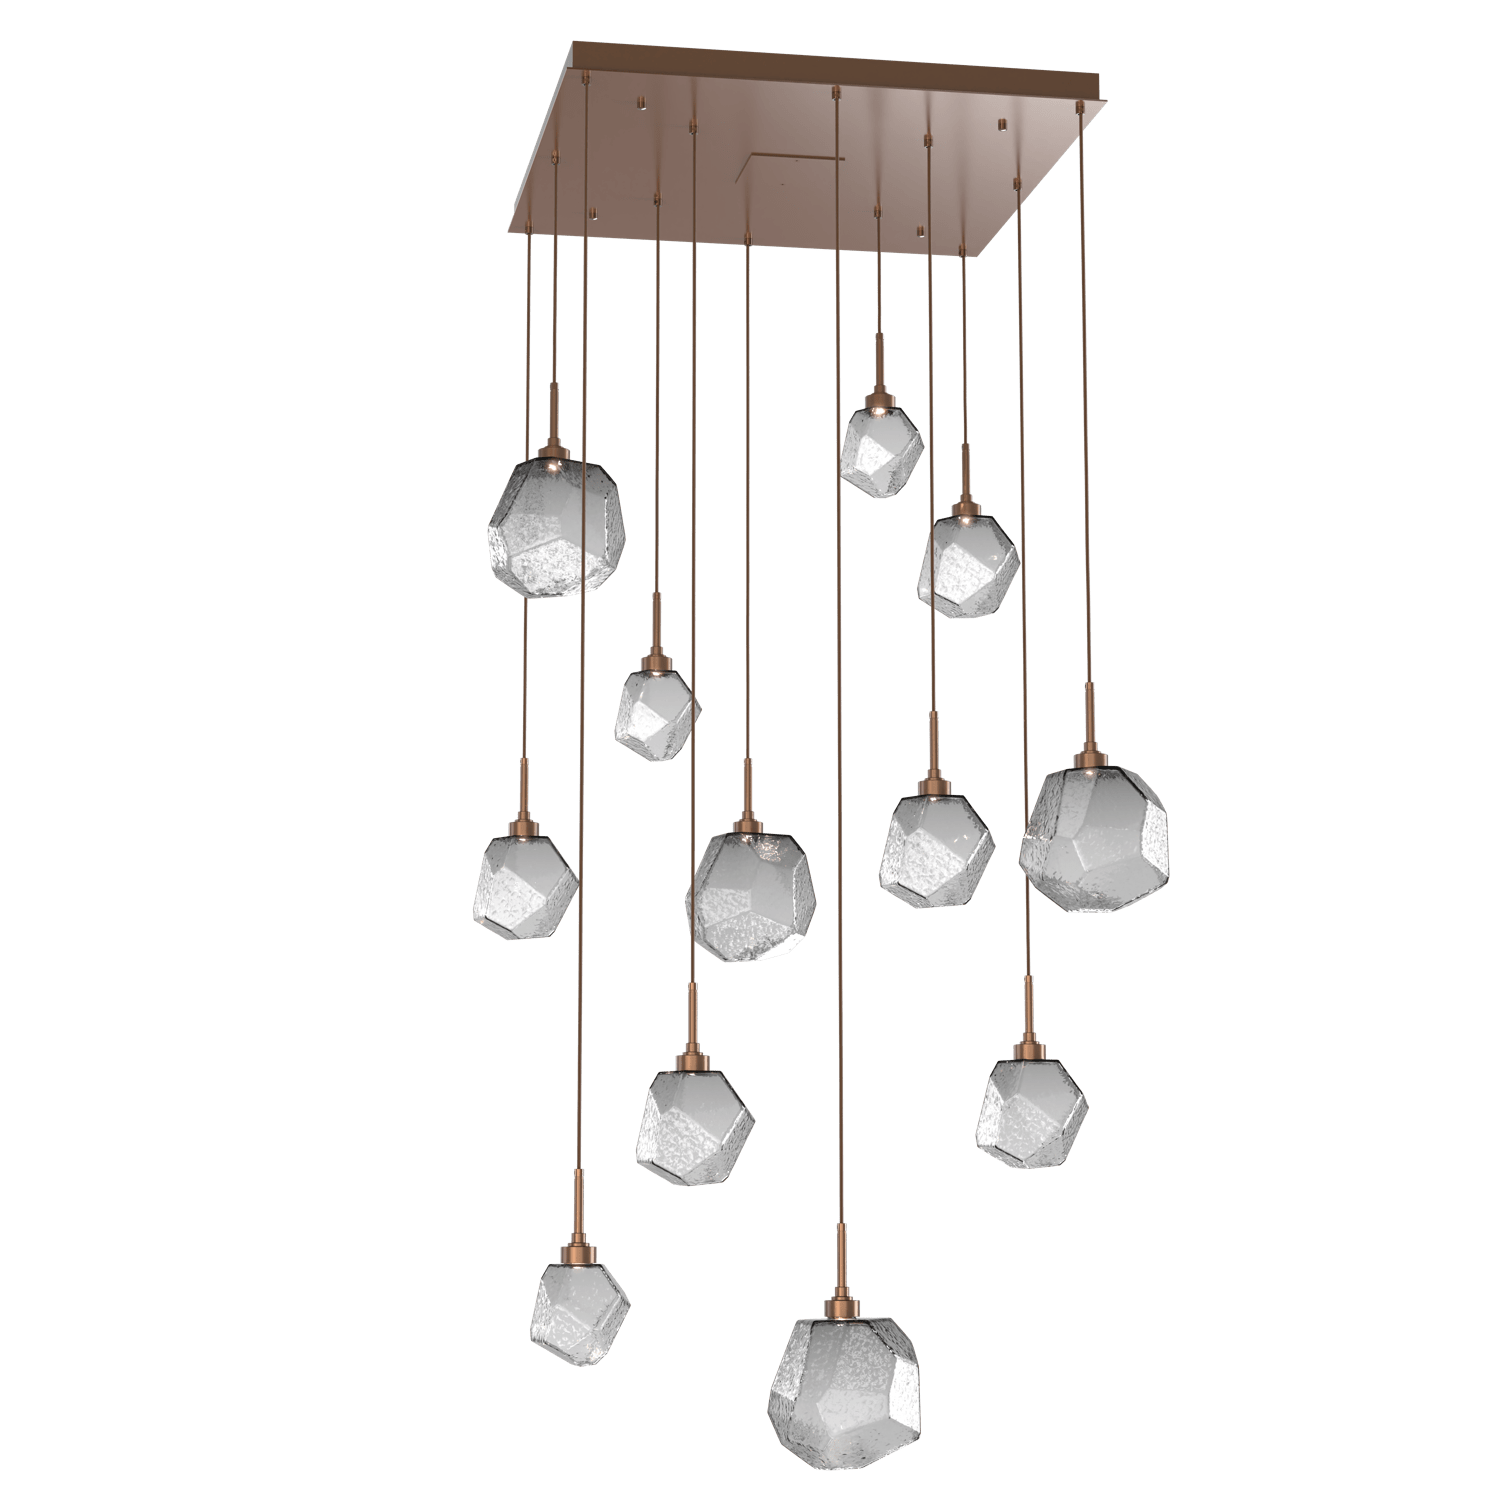 CHB0039-12-BB-S-Hammerton-Studio-Gem-12-light-square-pendant-chandelier-with-burnished-bronze-finish-and-smoke-blown-glass-shades-and-LED-lamping